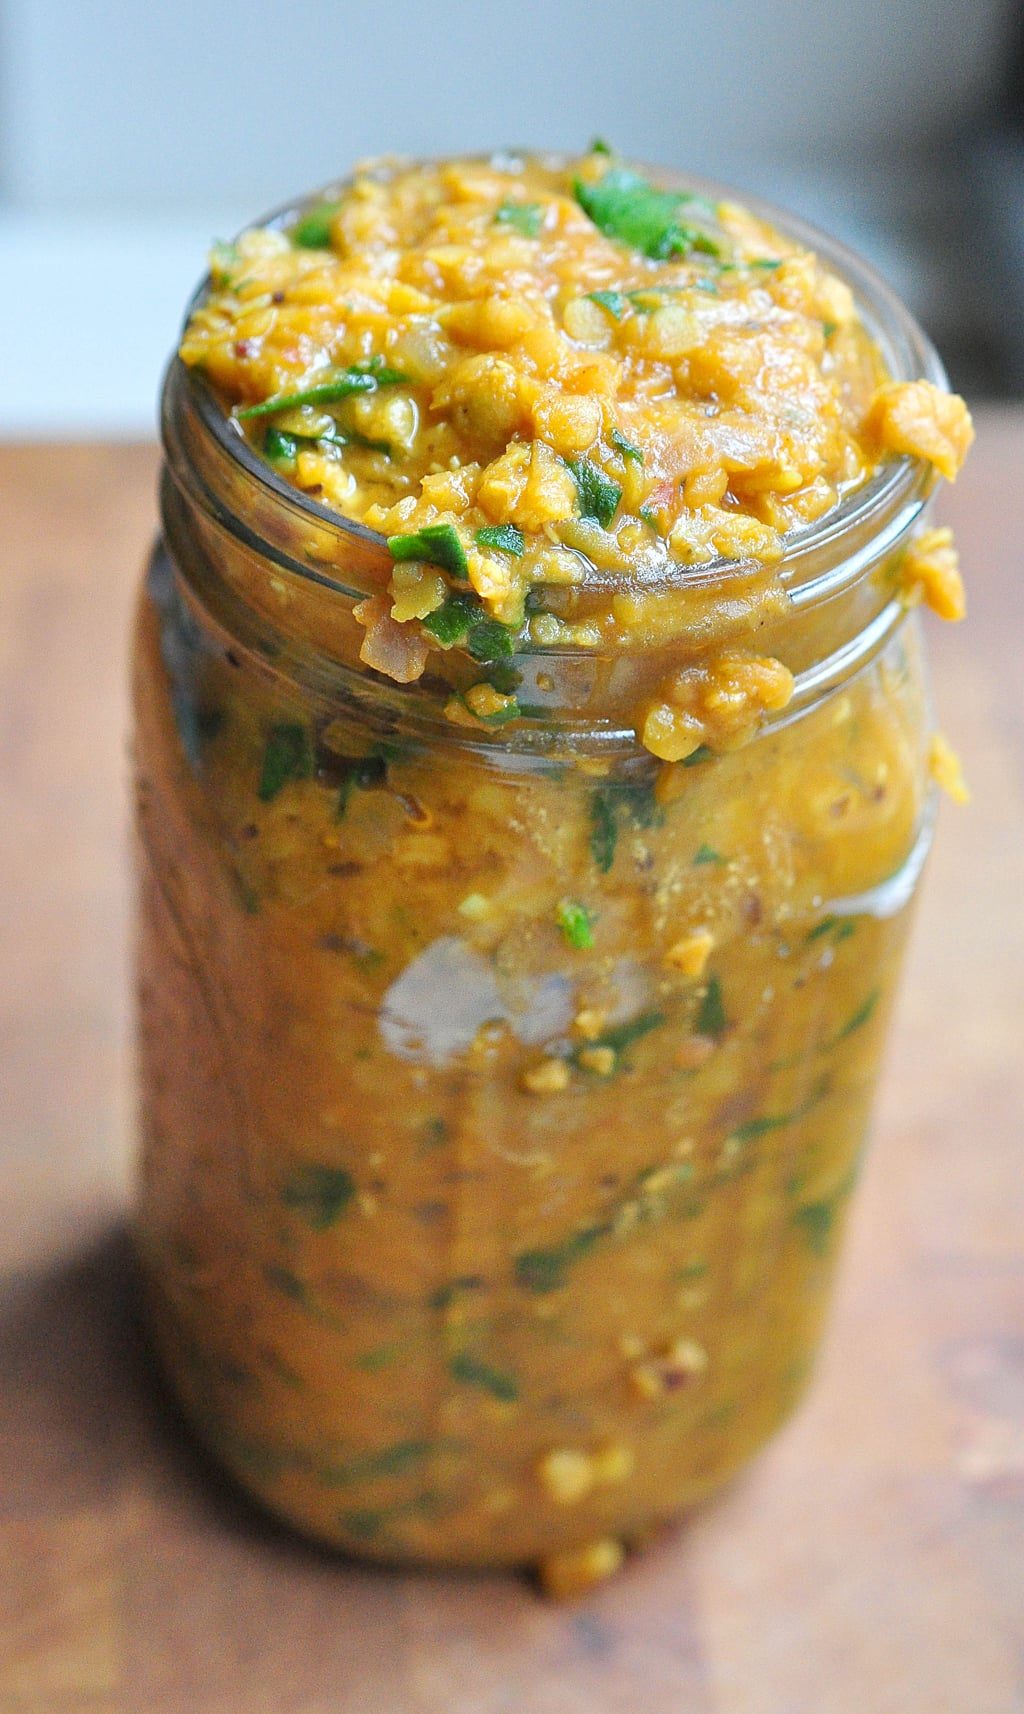 jar full of curried red lentil and spinach stew